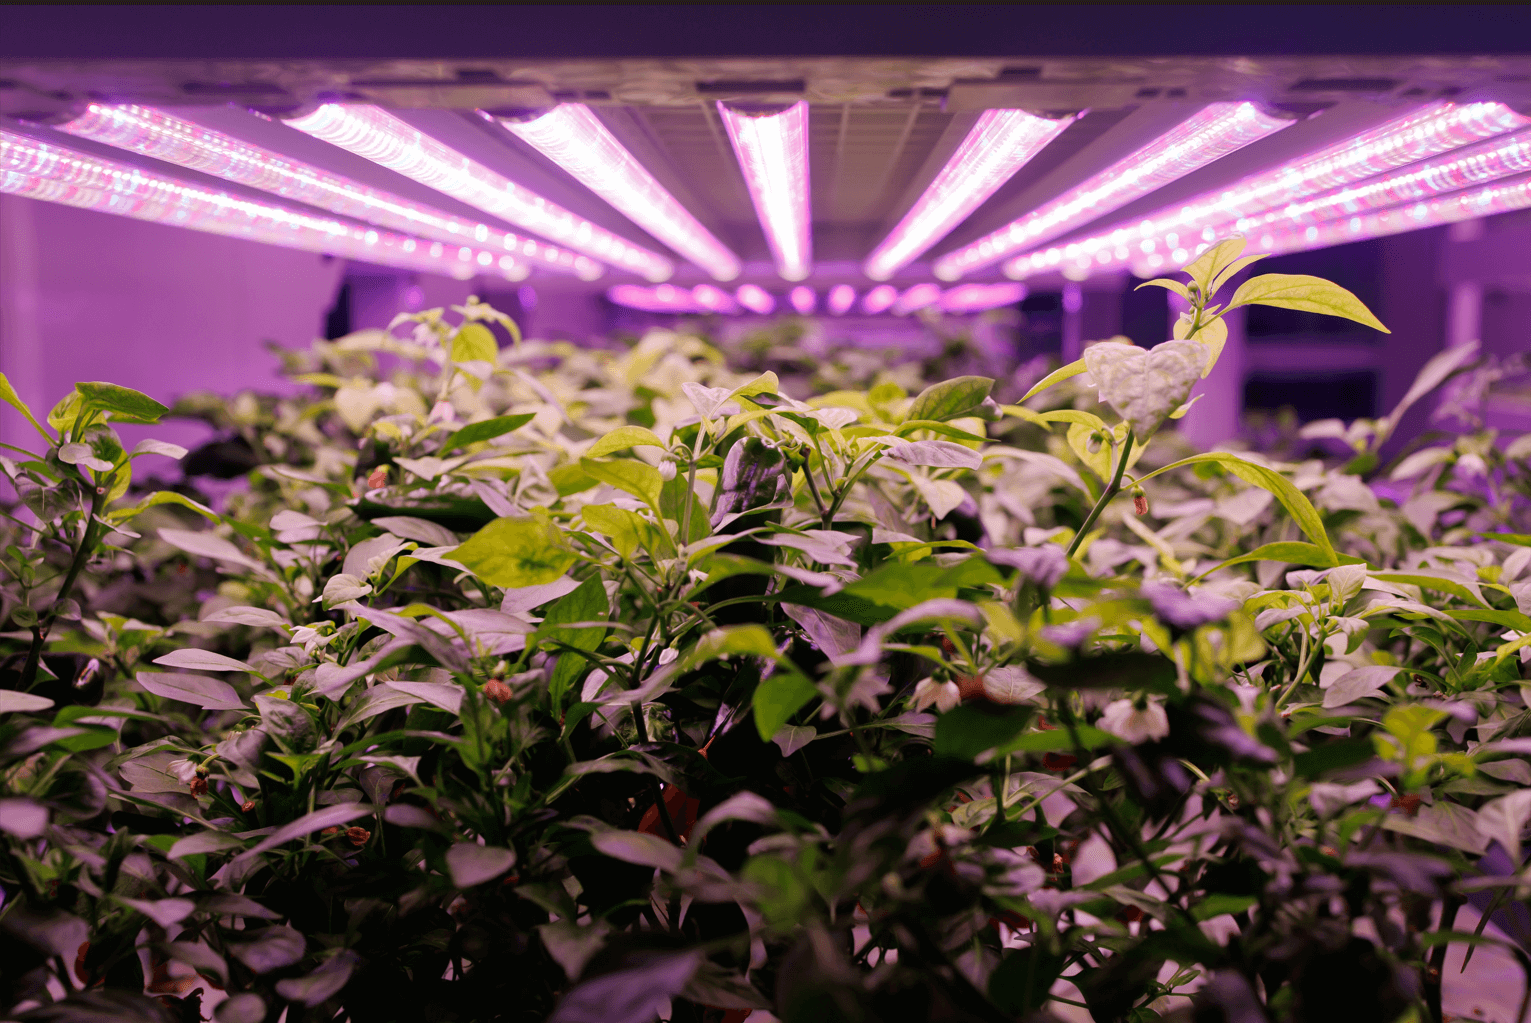 How Long To Leave UV Light On Plants